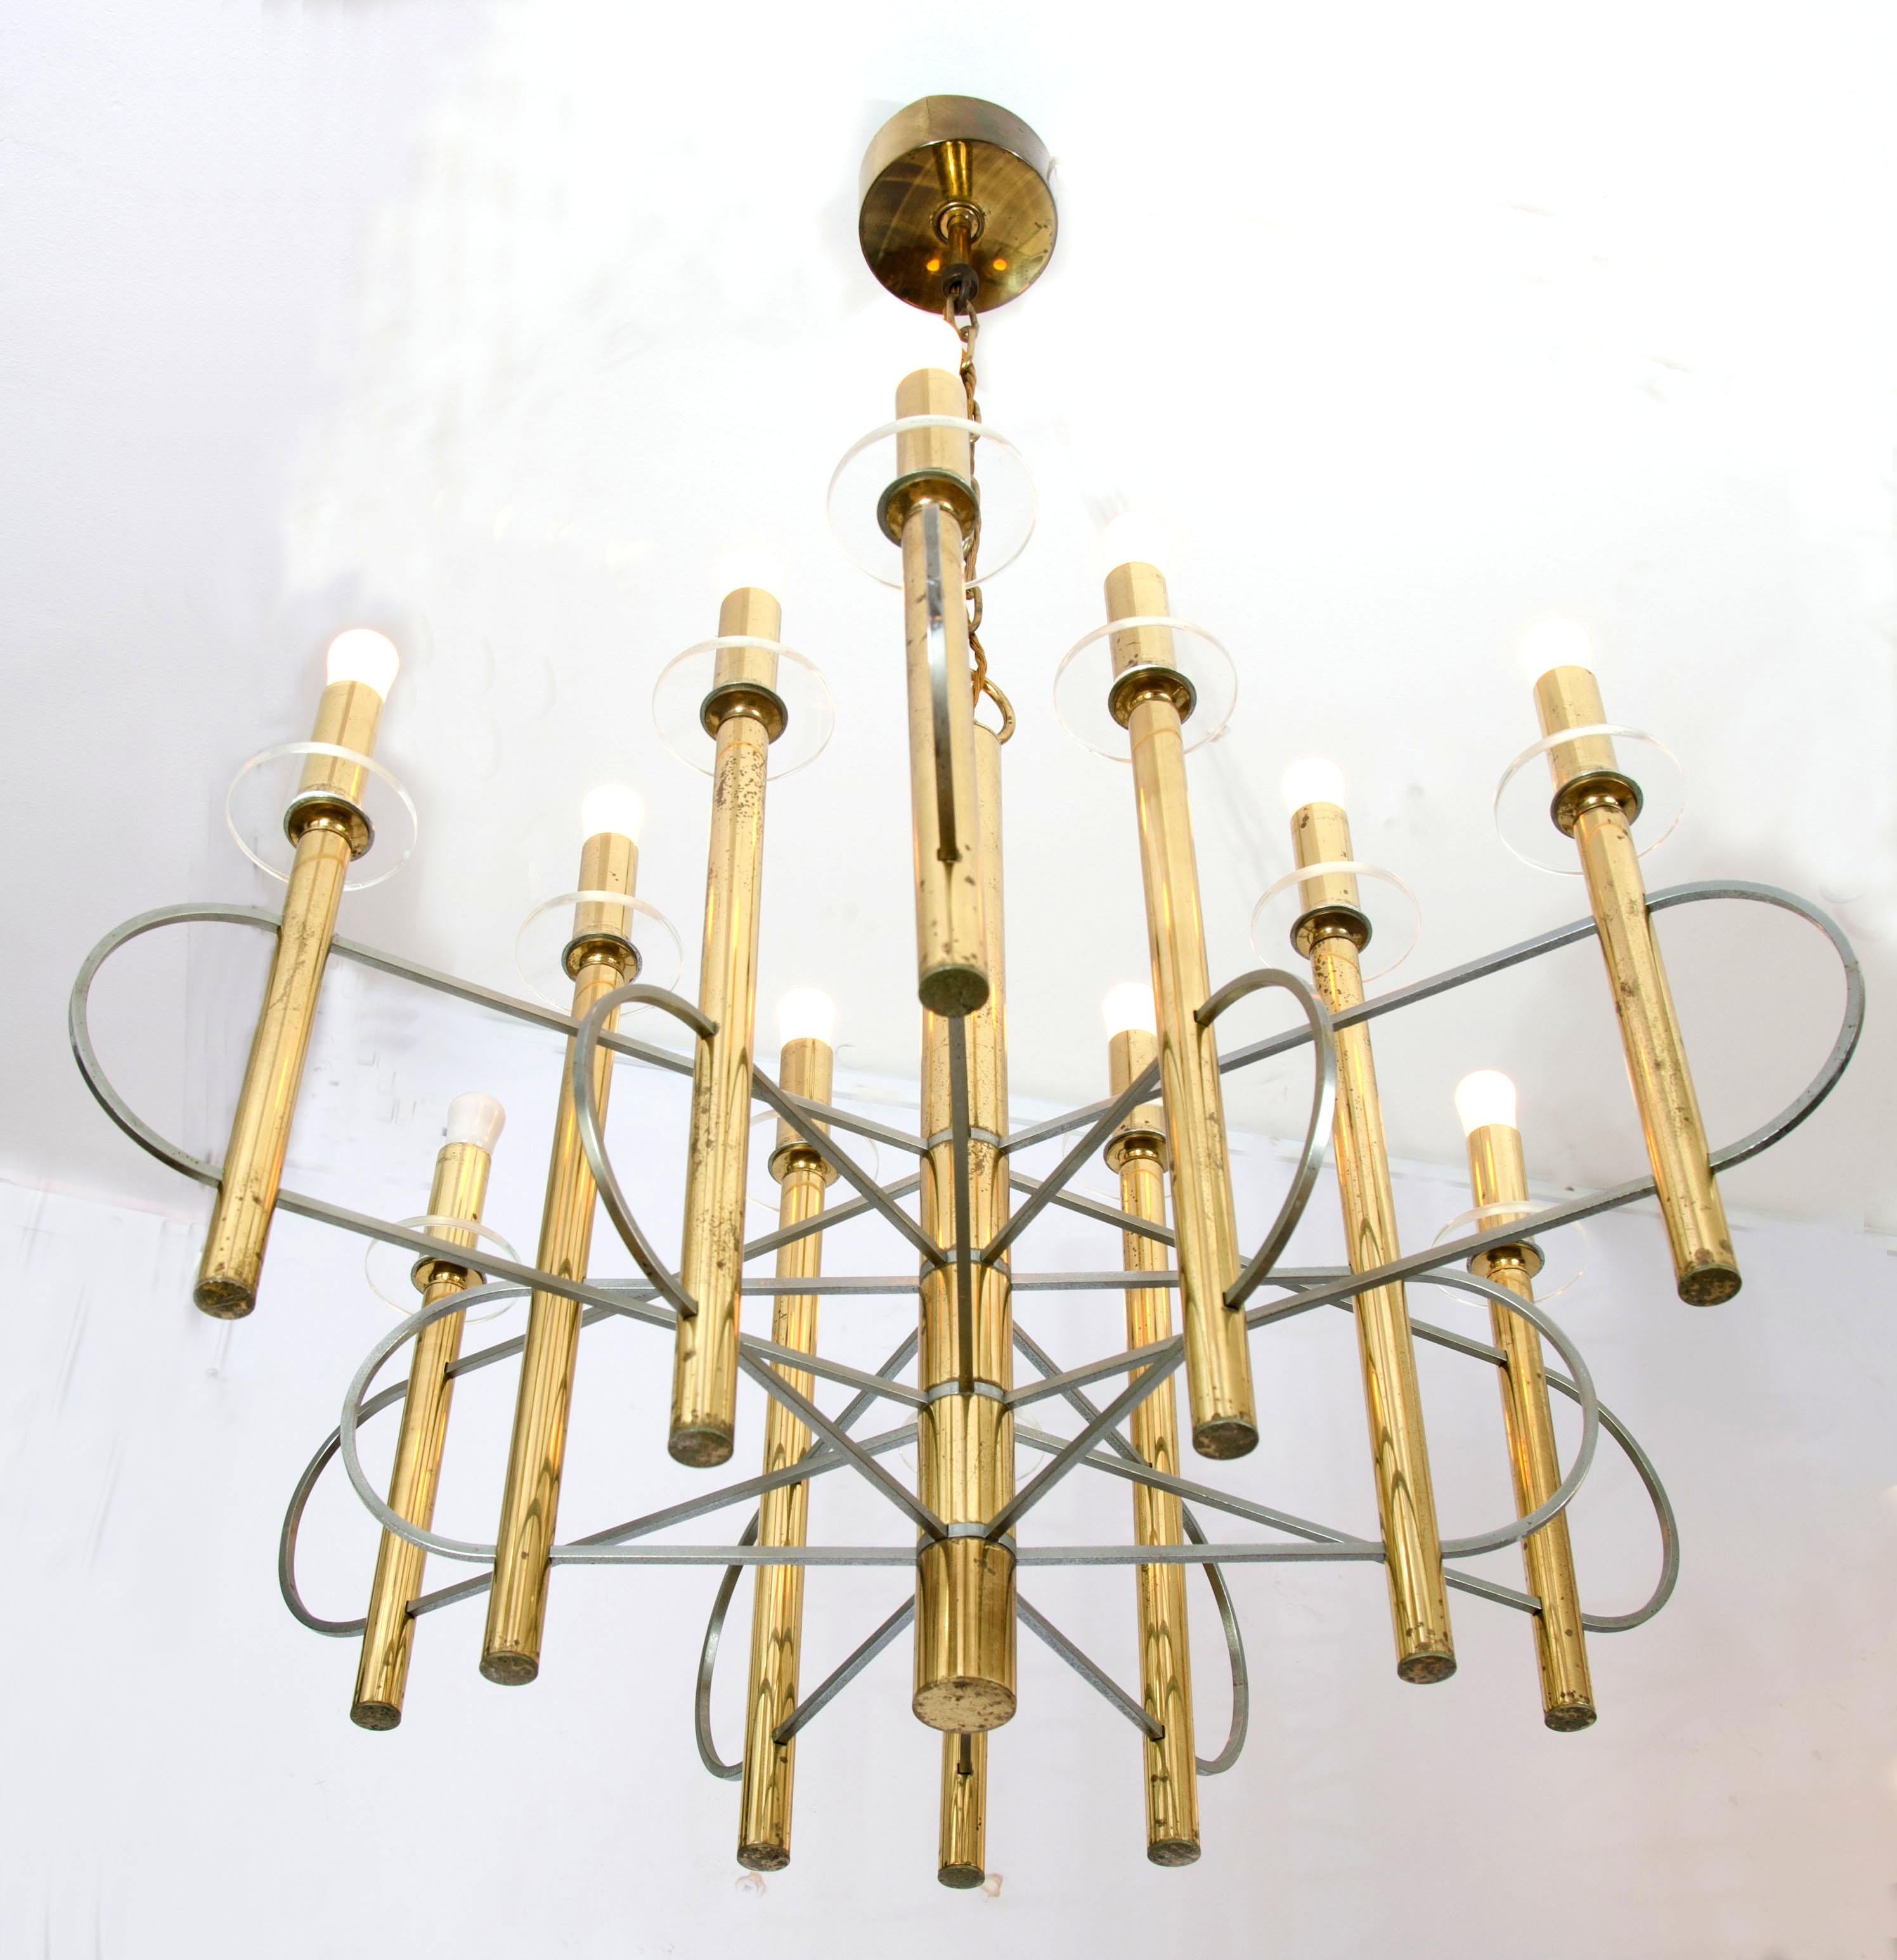 Sculptural Sputnik Space Age chandelier with clean geometric lines in brass and nickel. Each brass light holds a clear glass disks displaying 12 lights by Gaetano Sciolari, Italy 1960s

The maximum drop is 100 cm and the chandelier height is 54